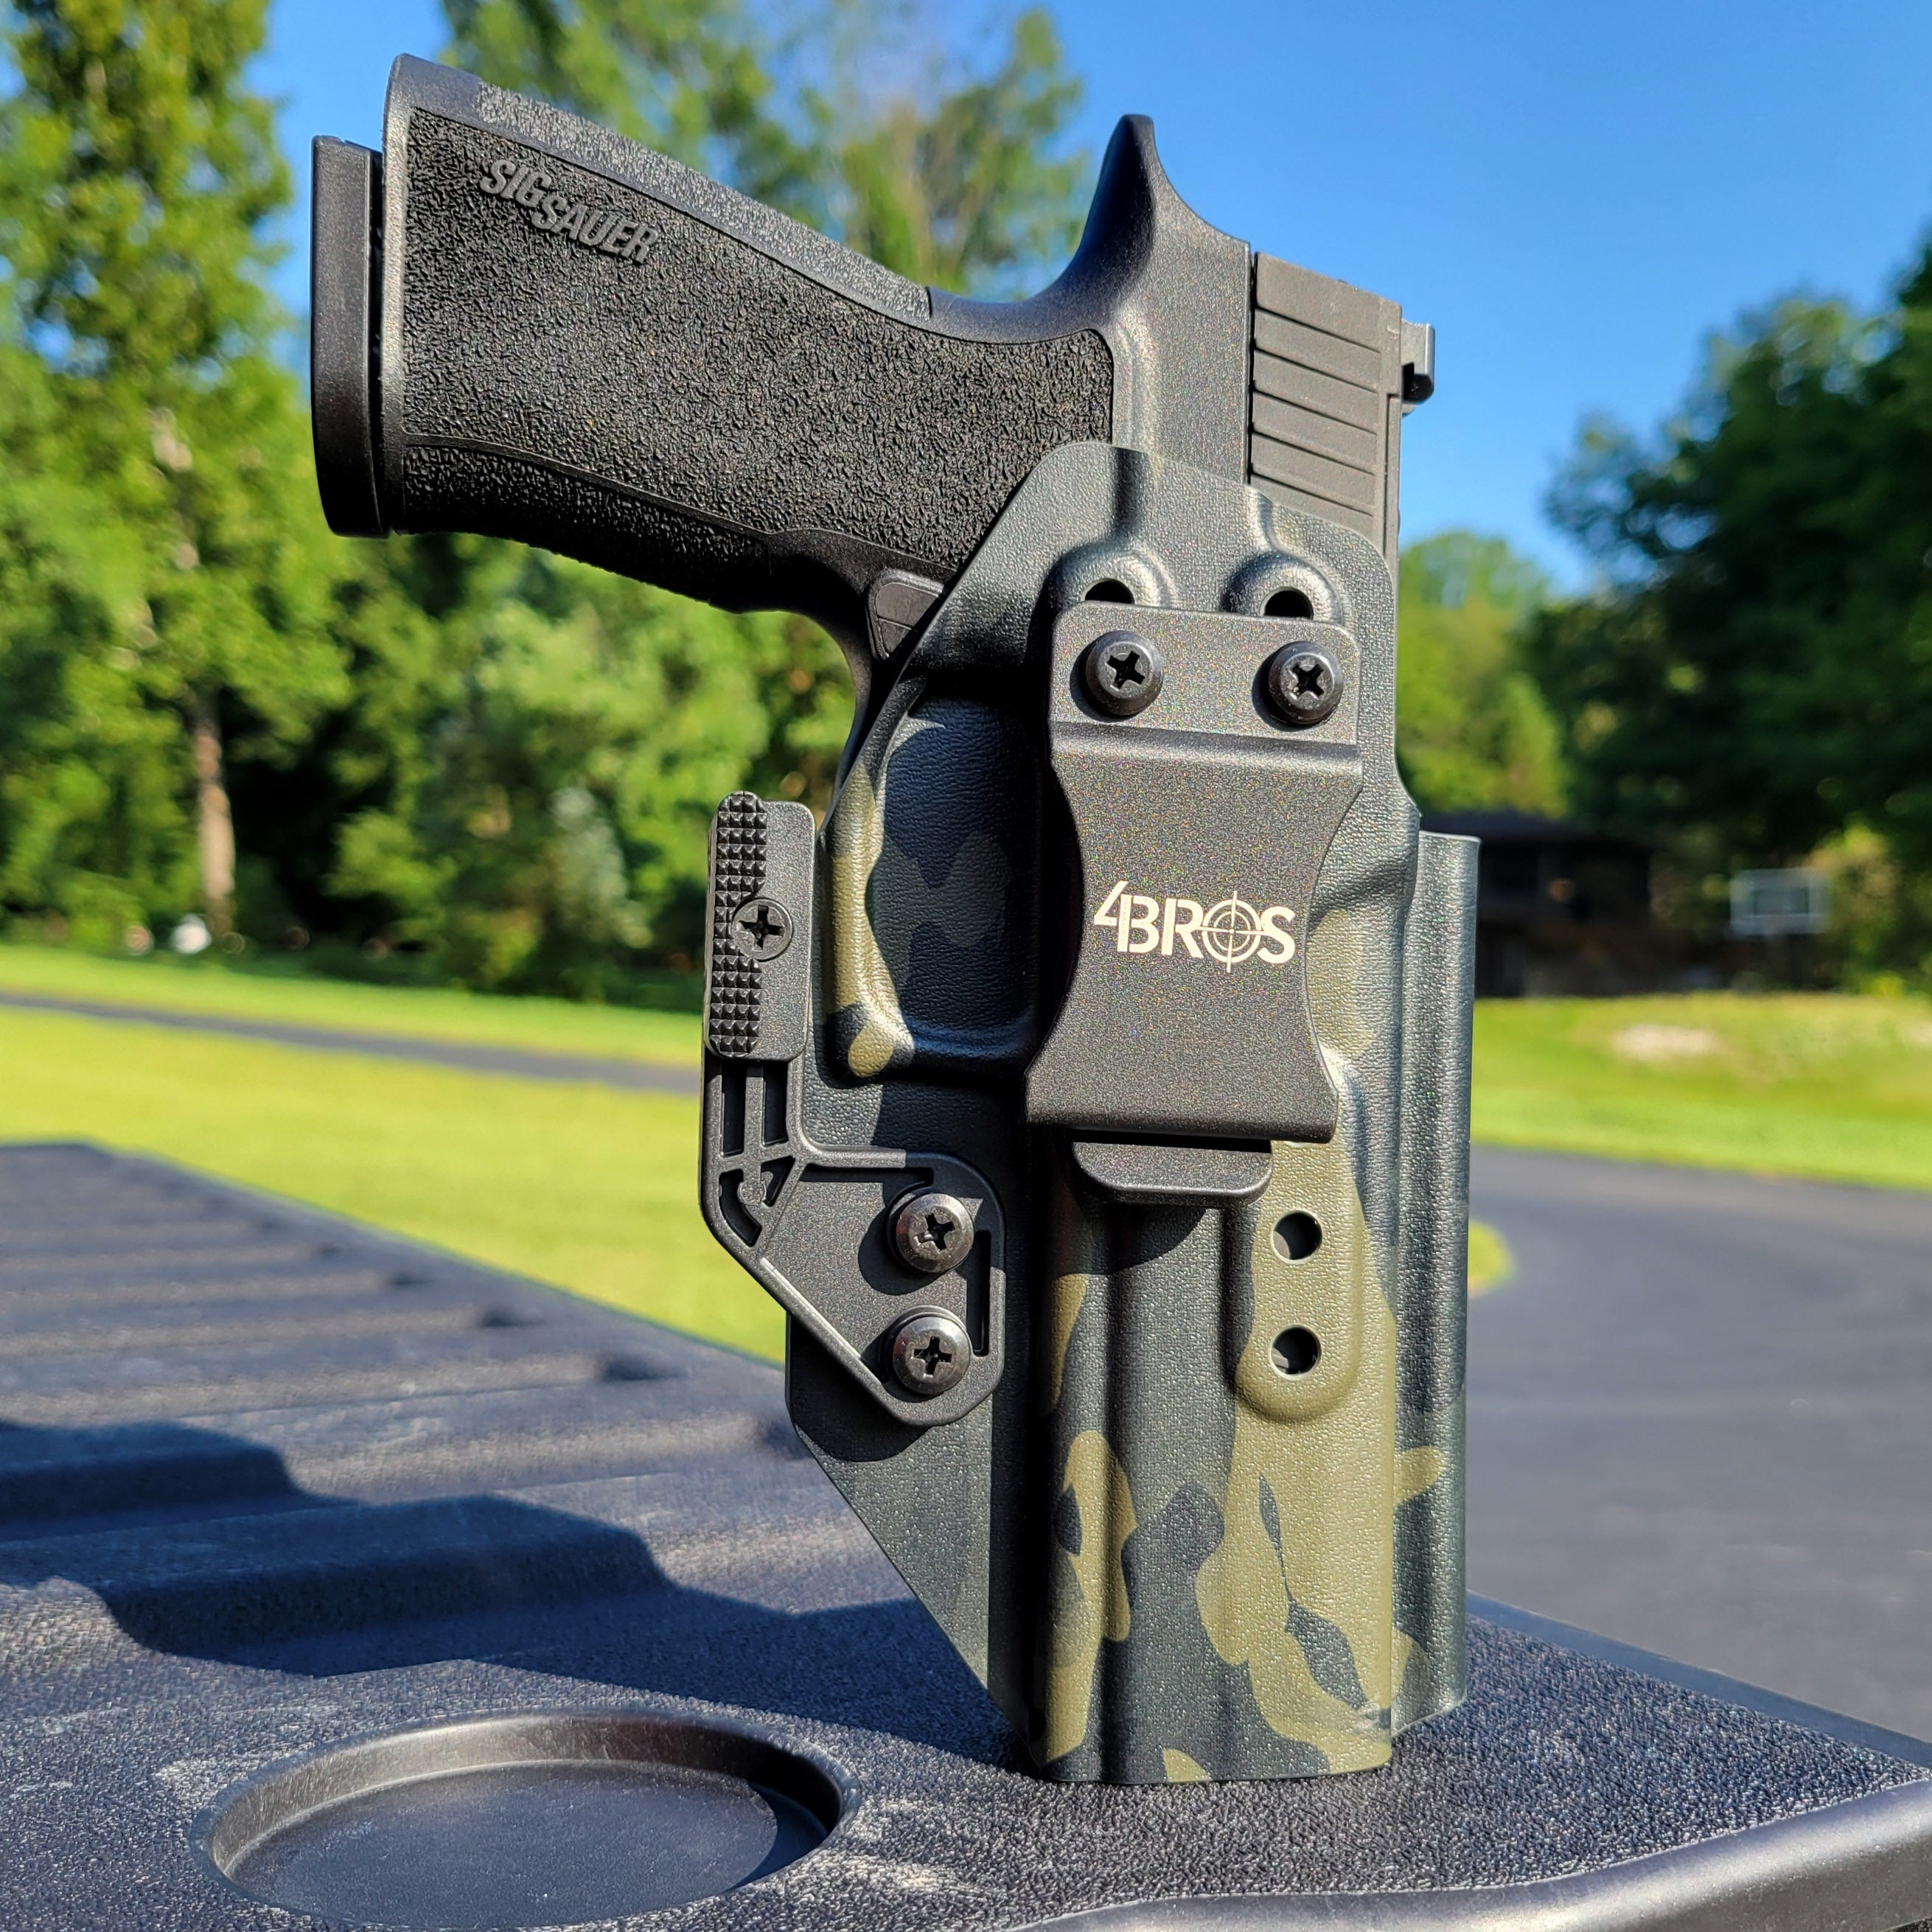 Inside Waistband IWB Kydex Taco Style Holster designed to fit the Sig Sauer 10MM . Full sweat guard, adjustable retention, open muzzle, and profiled for a red dot sight. Proudly made in the USA for veterans and law enforcement. 10 MM P320-XTEN, P320 X Ten or P 320 XTEN.